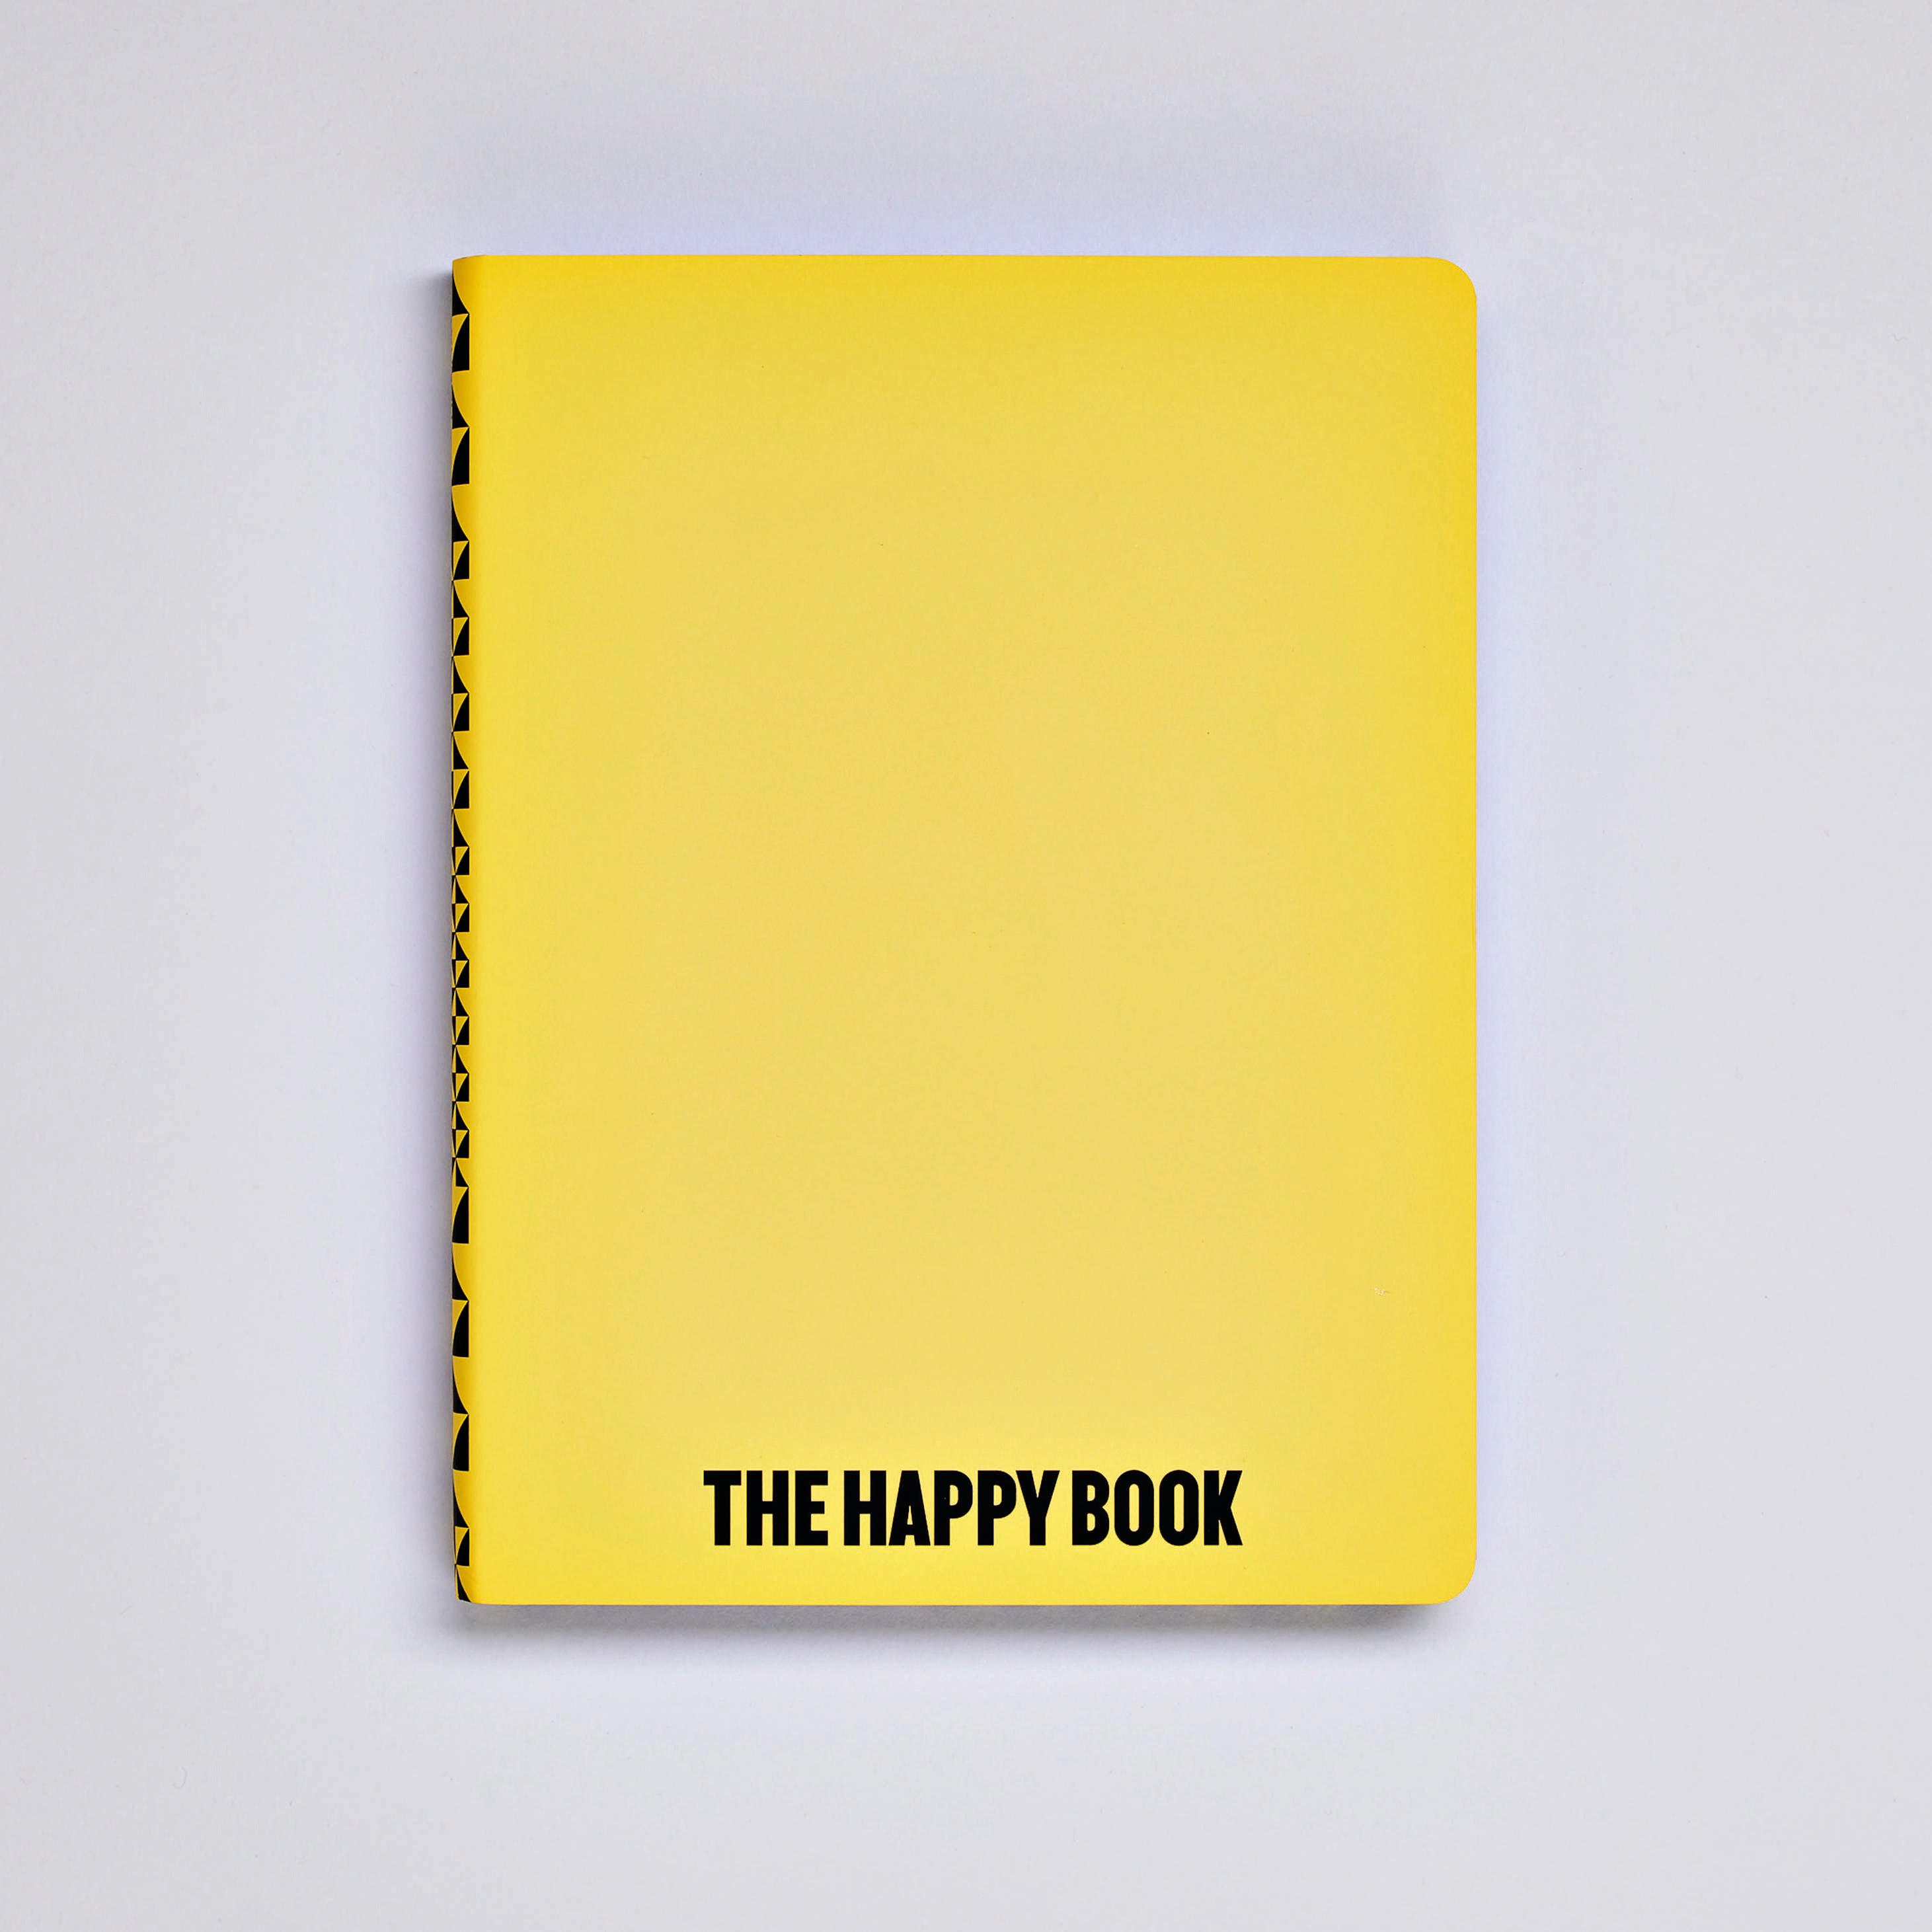 THE HAPPY BOOK | GRAPHIC FAME L Serie |  gelbes NOTIZBUCH | Nuuna - Charles & Marie